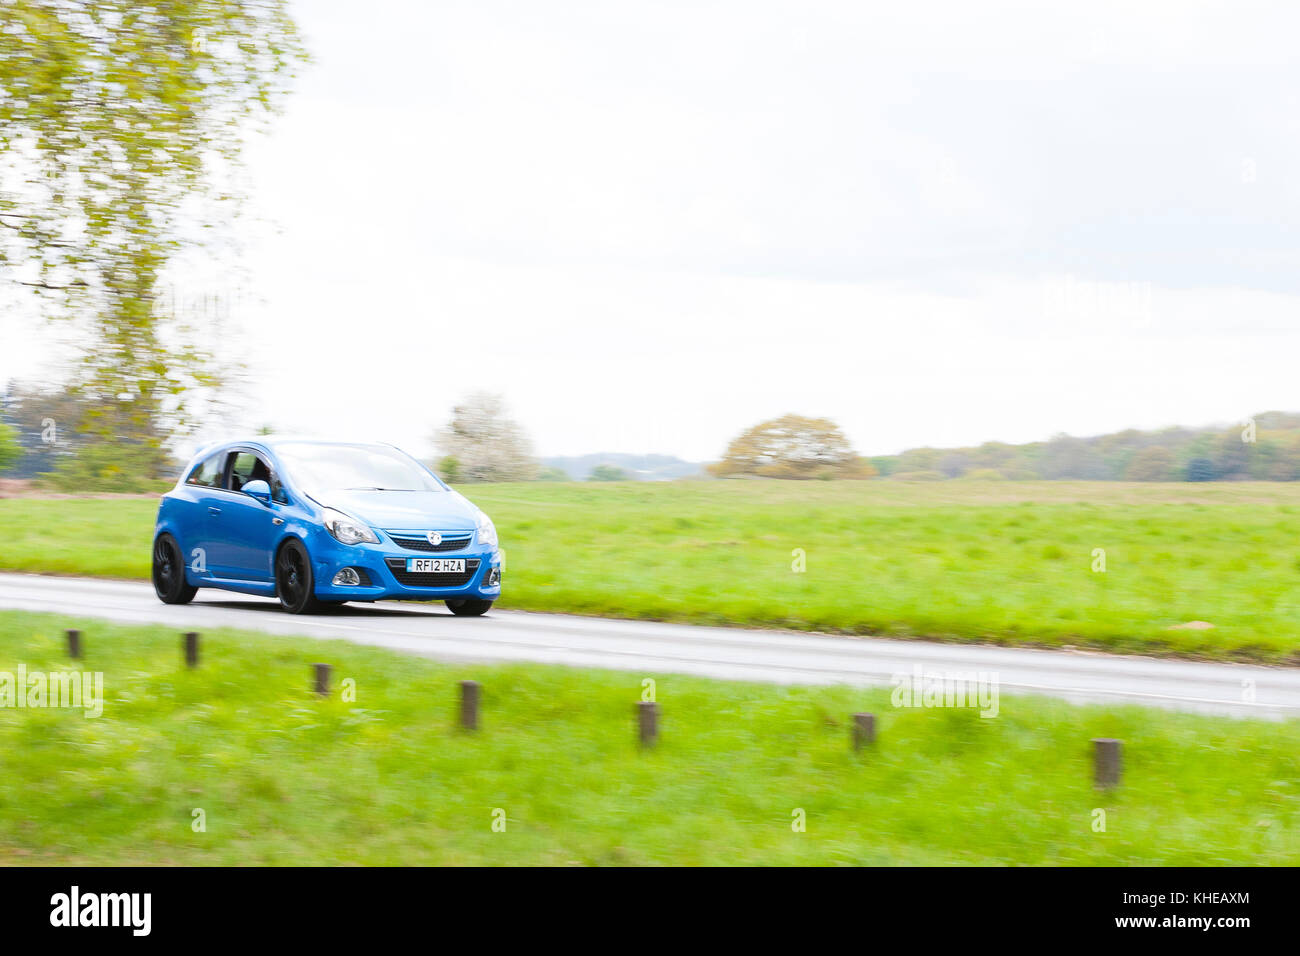 Hertfordshire, UK. A blue Vauxhall Astra drives along a narrow country road. Stock Photo